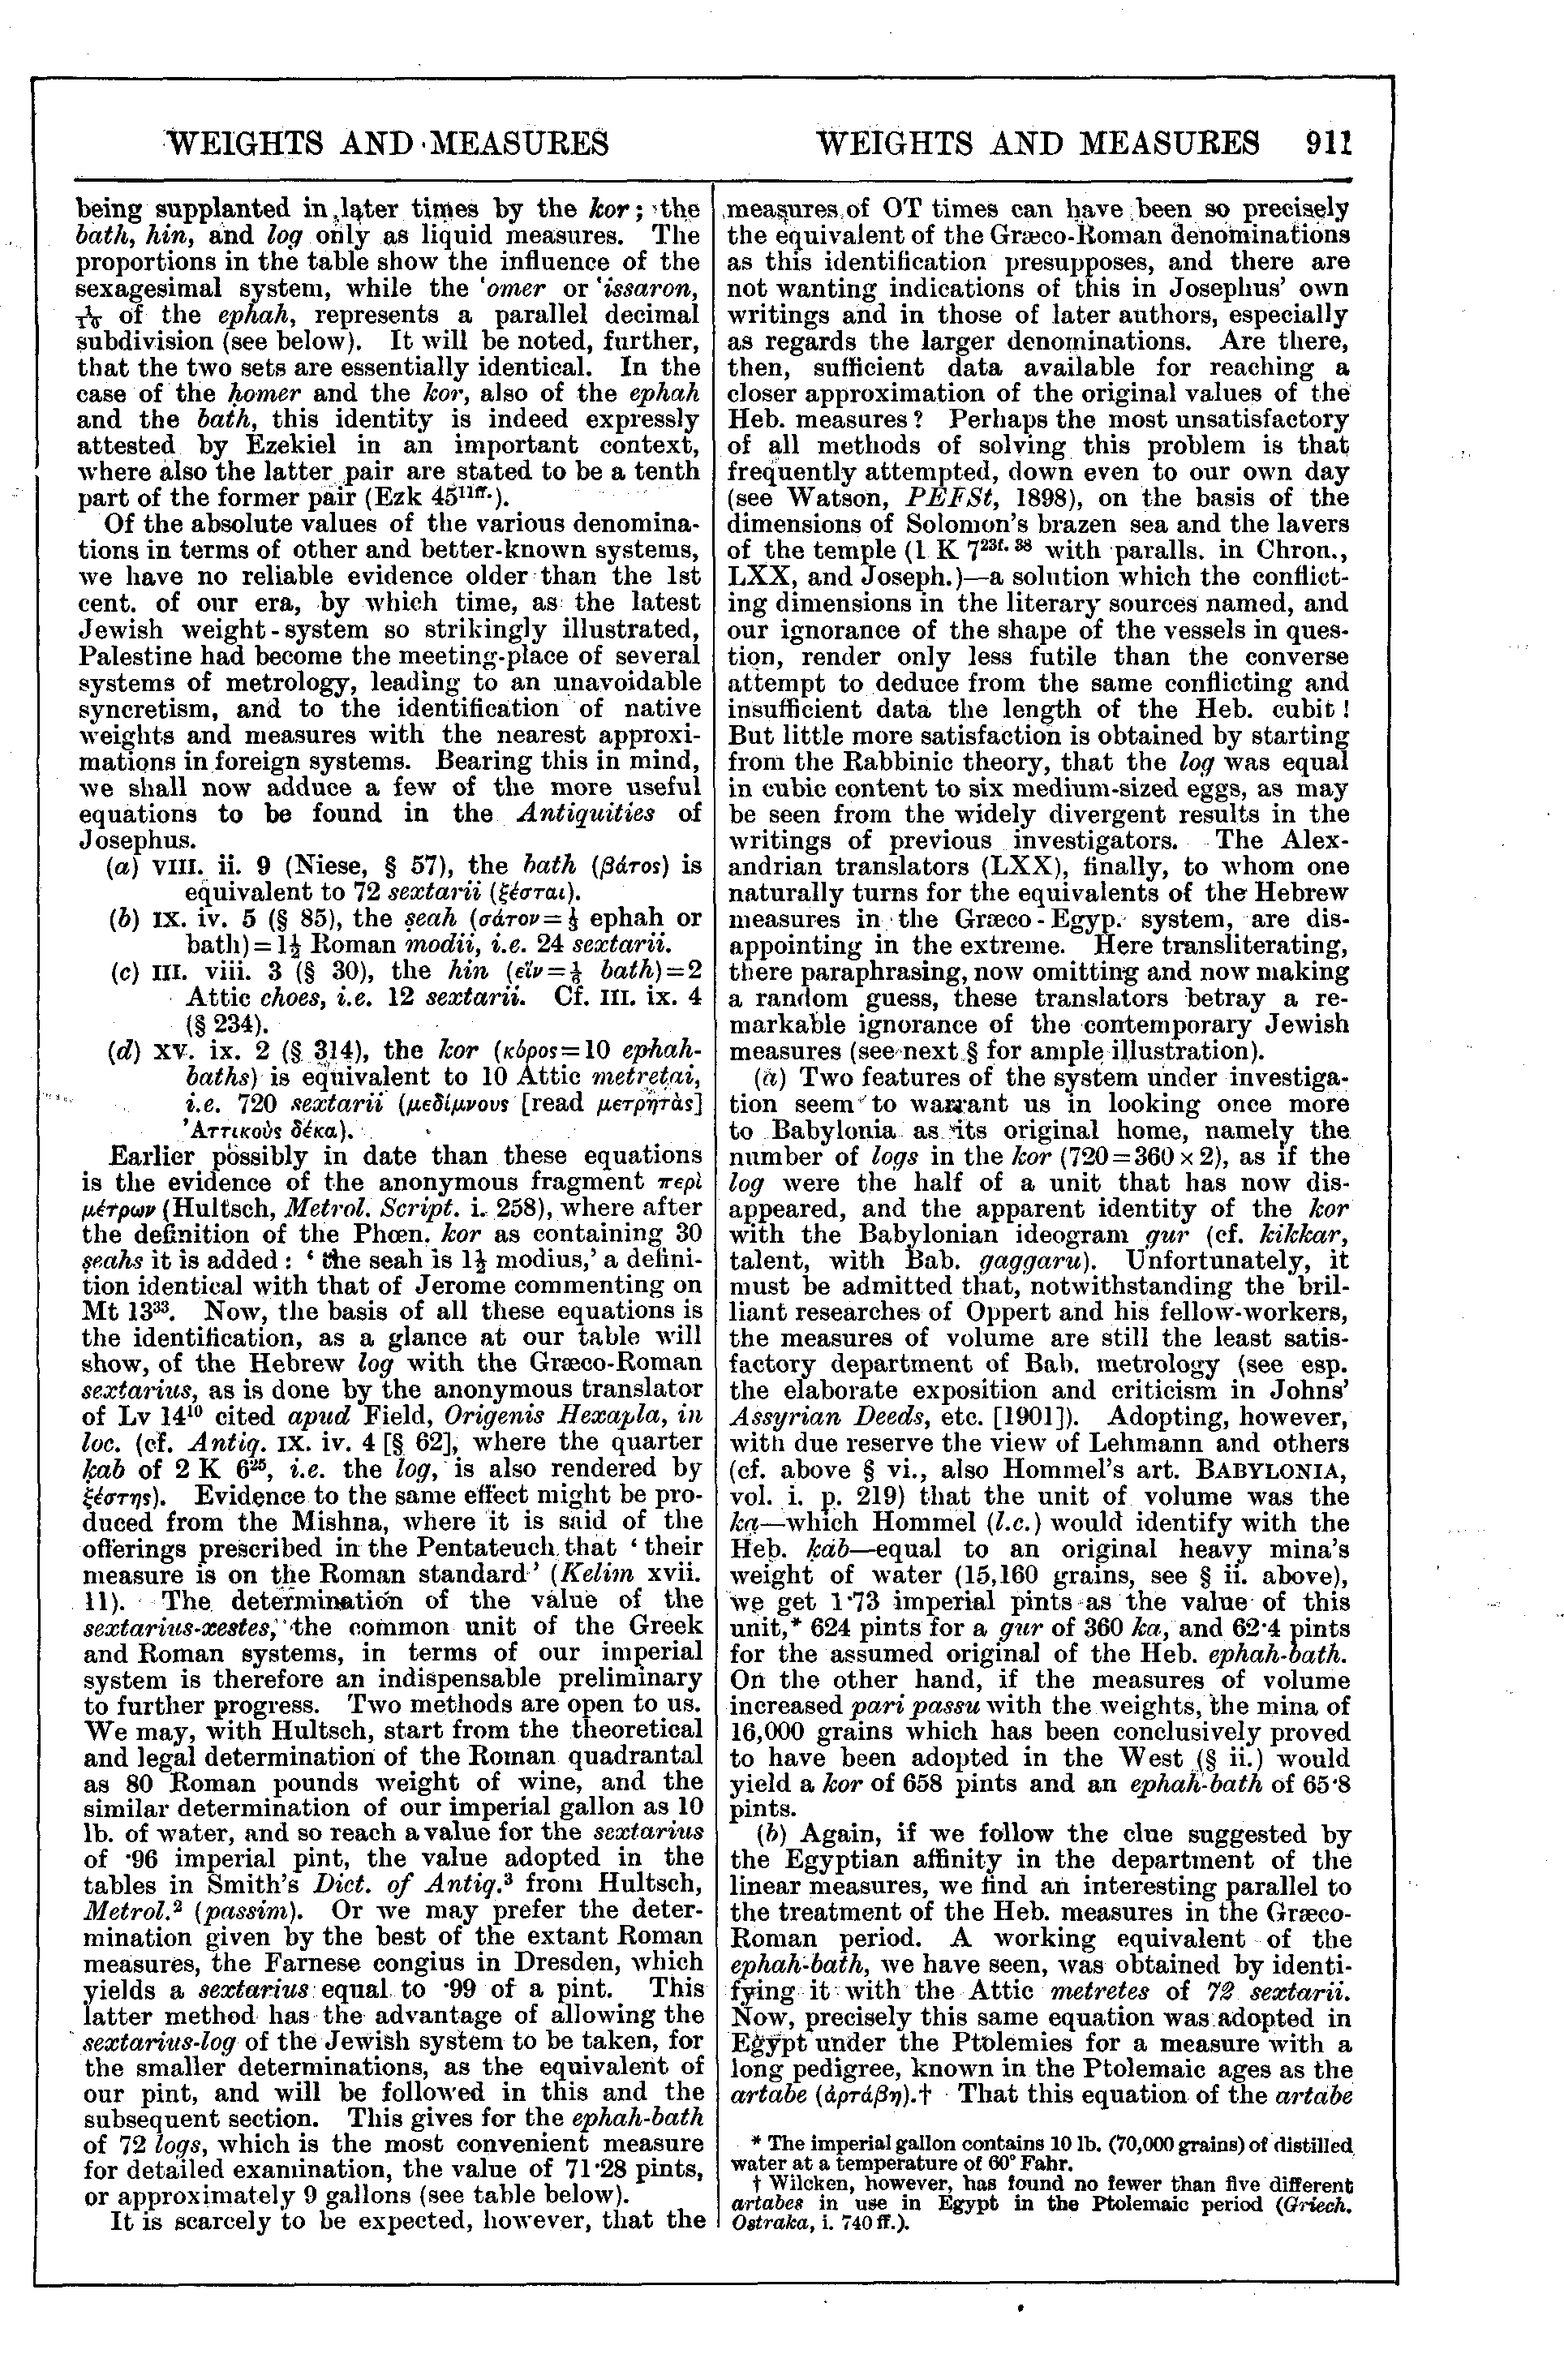 Image of page 911